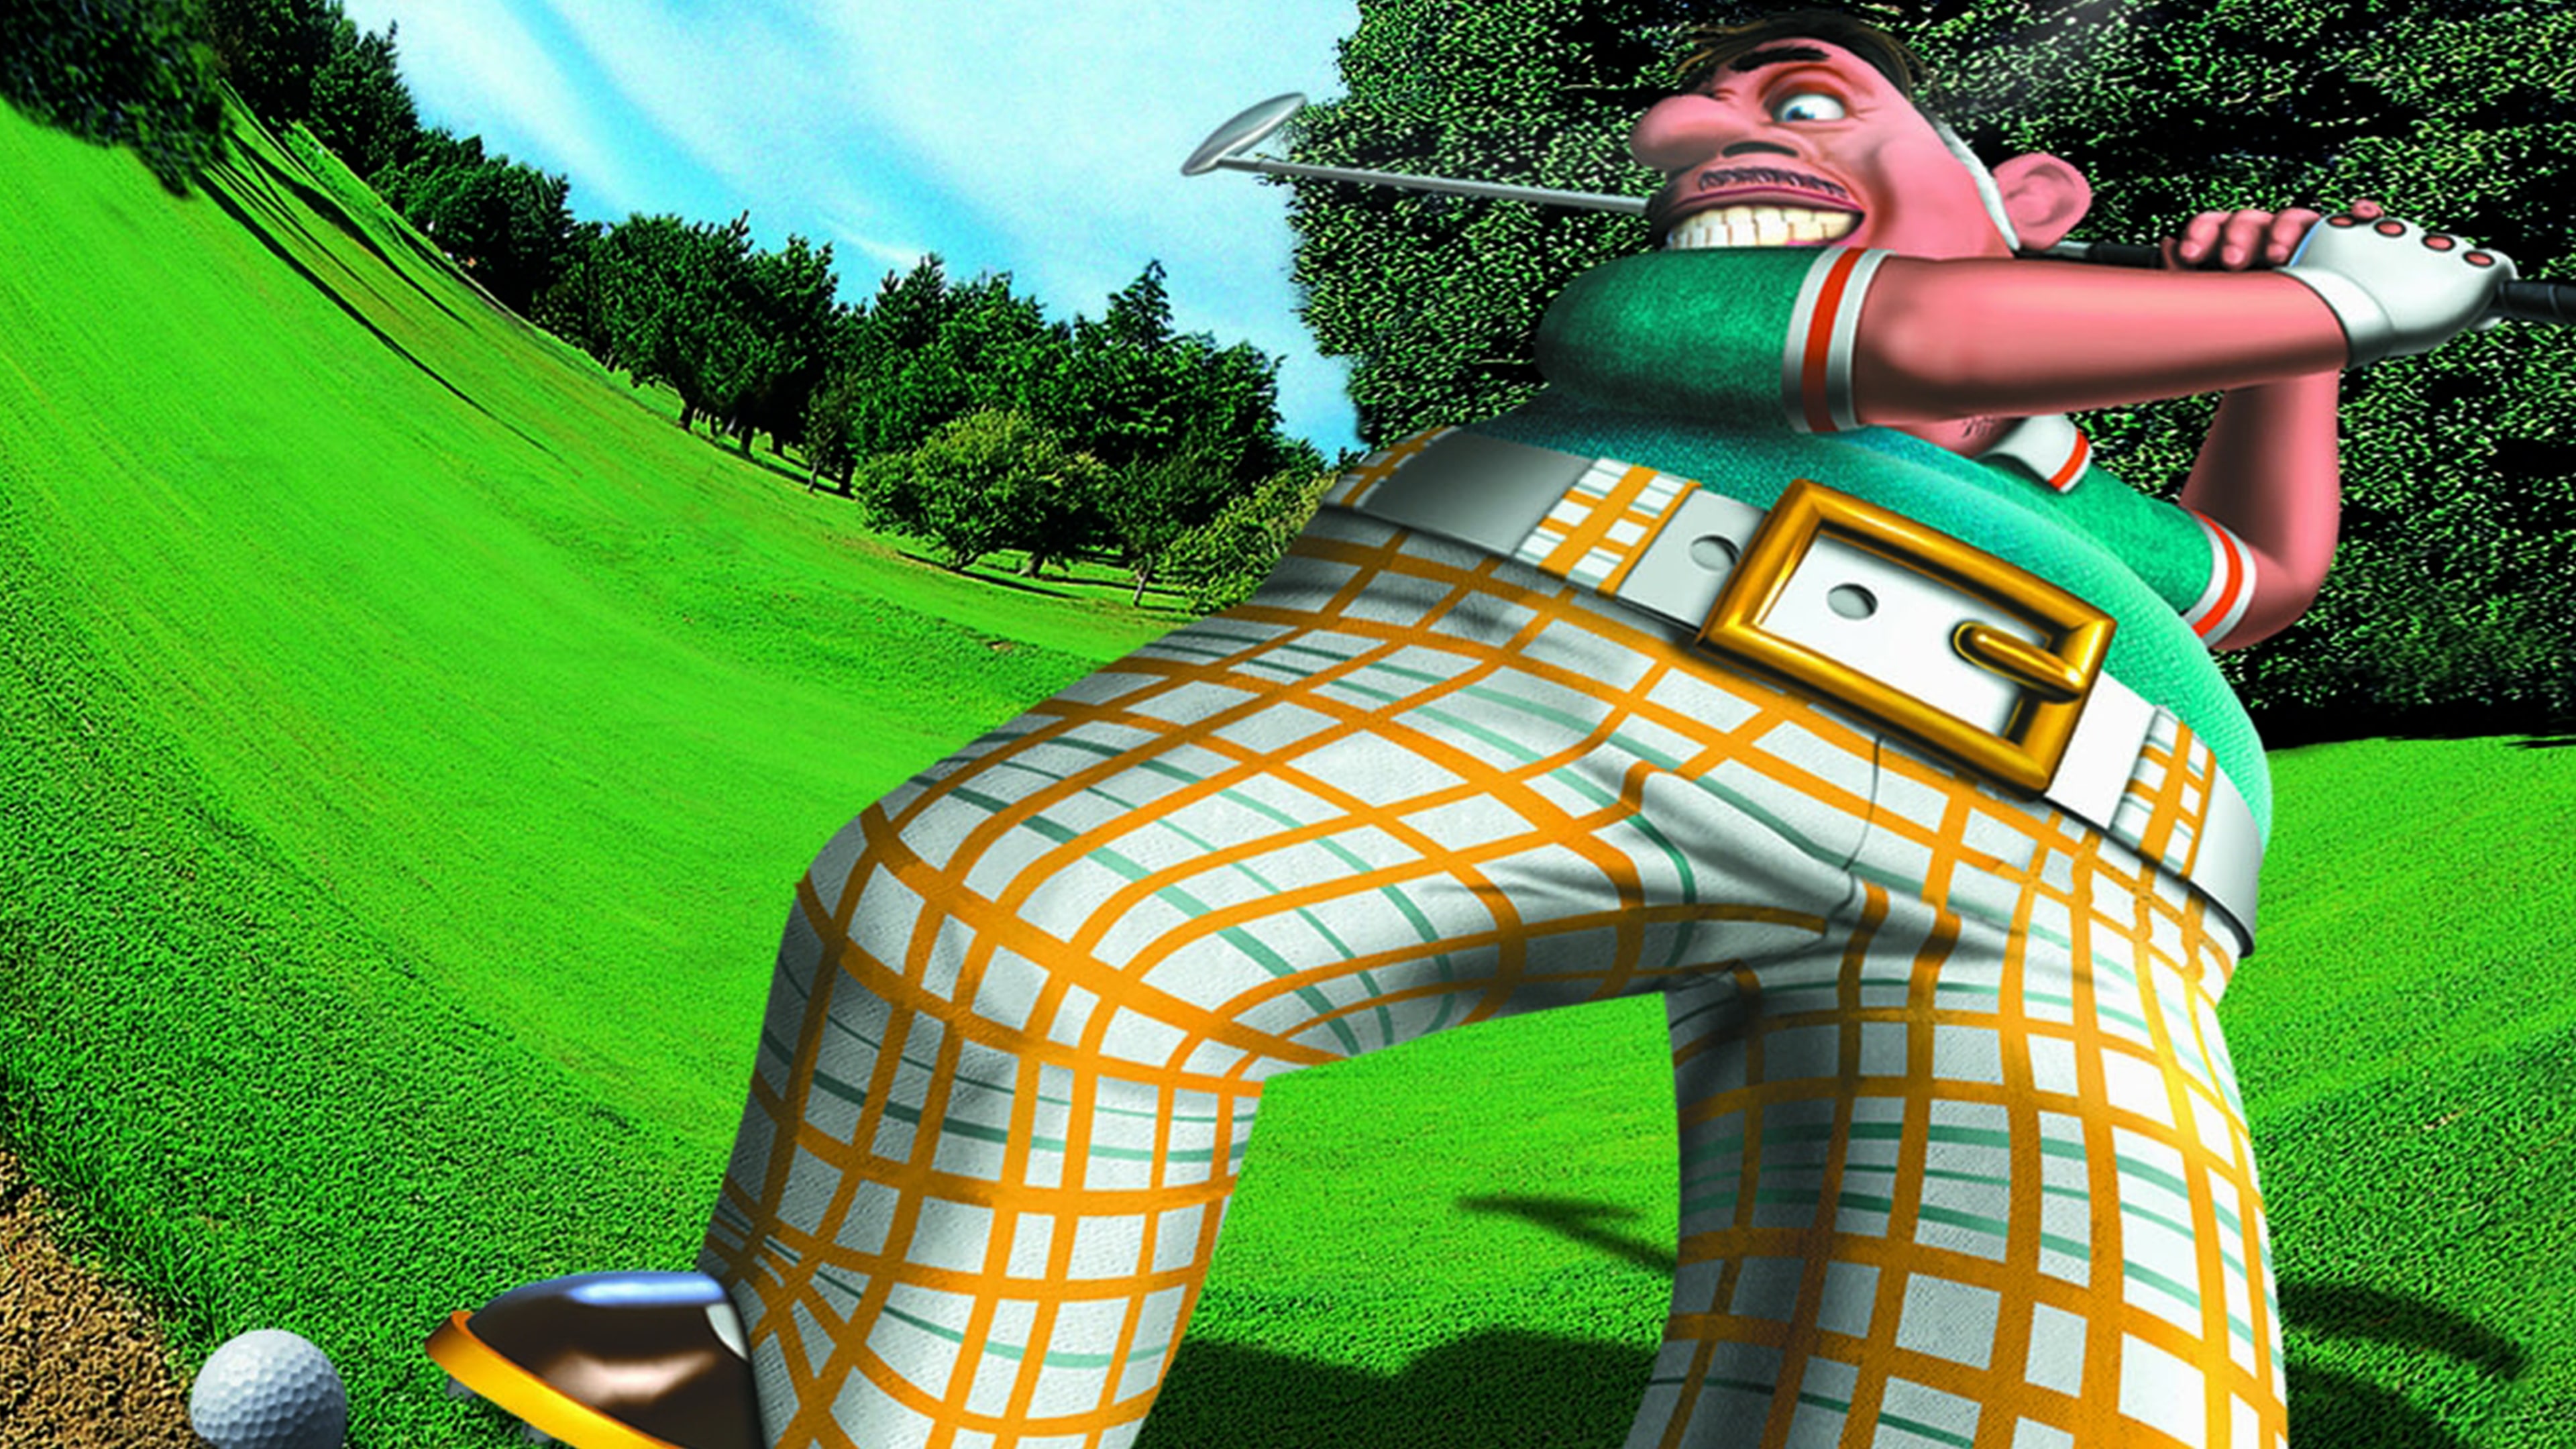 Everybody's Golf 2 (PS1)